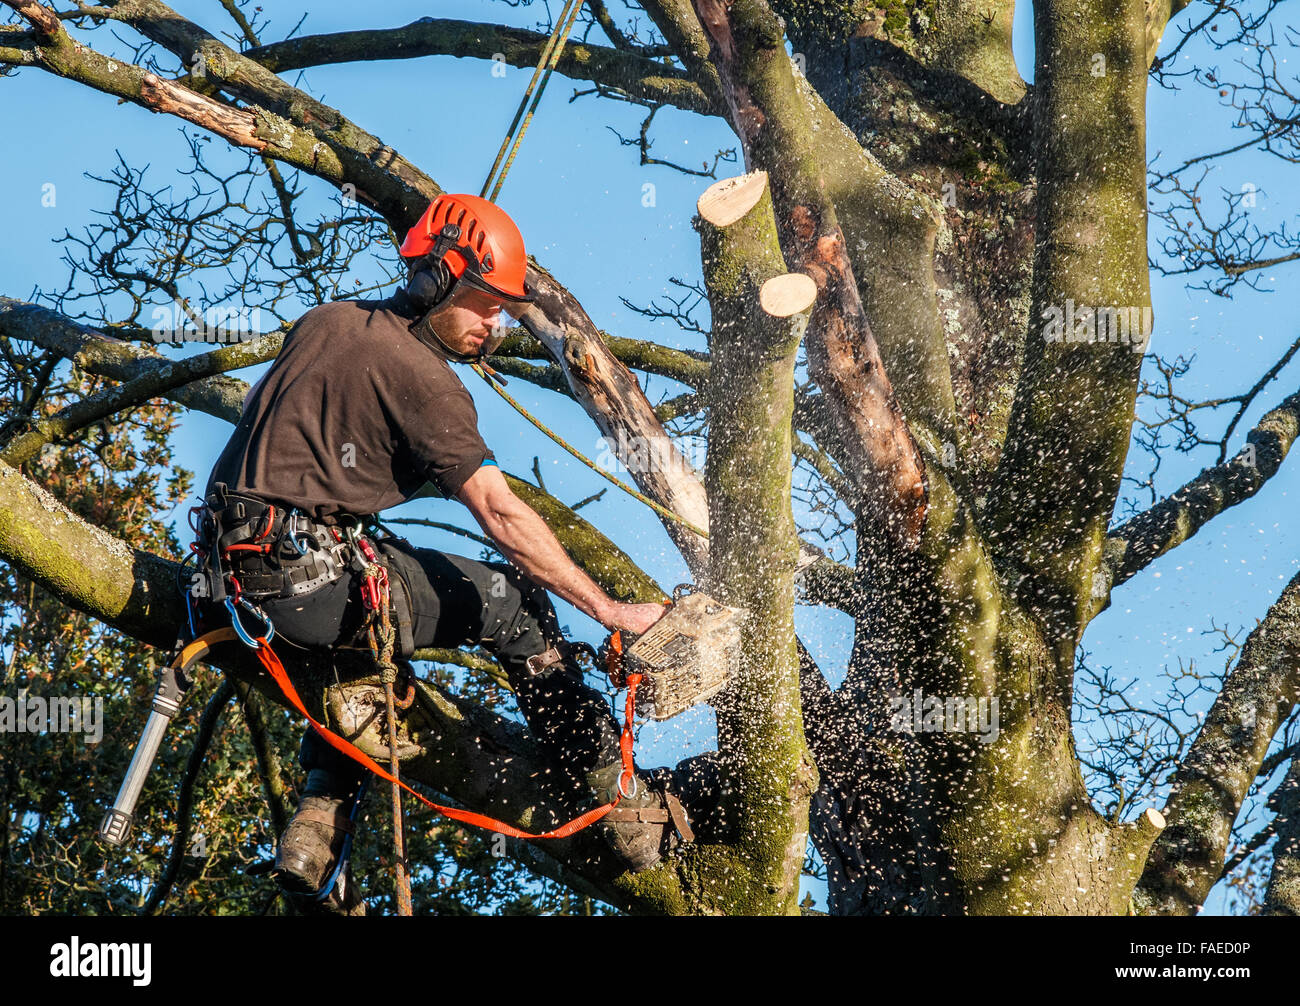 Tree surgeon hanging from ropes in a tree using a chainsaw to cut branches down. Chainsaw has sawdust and chippings around it. Stock Photo